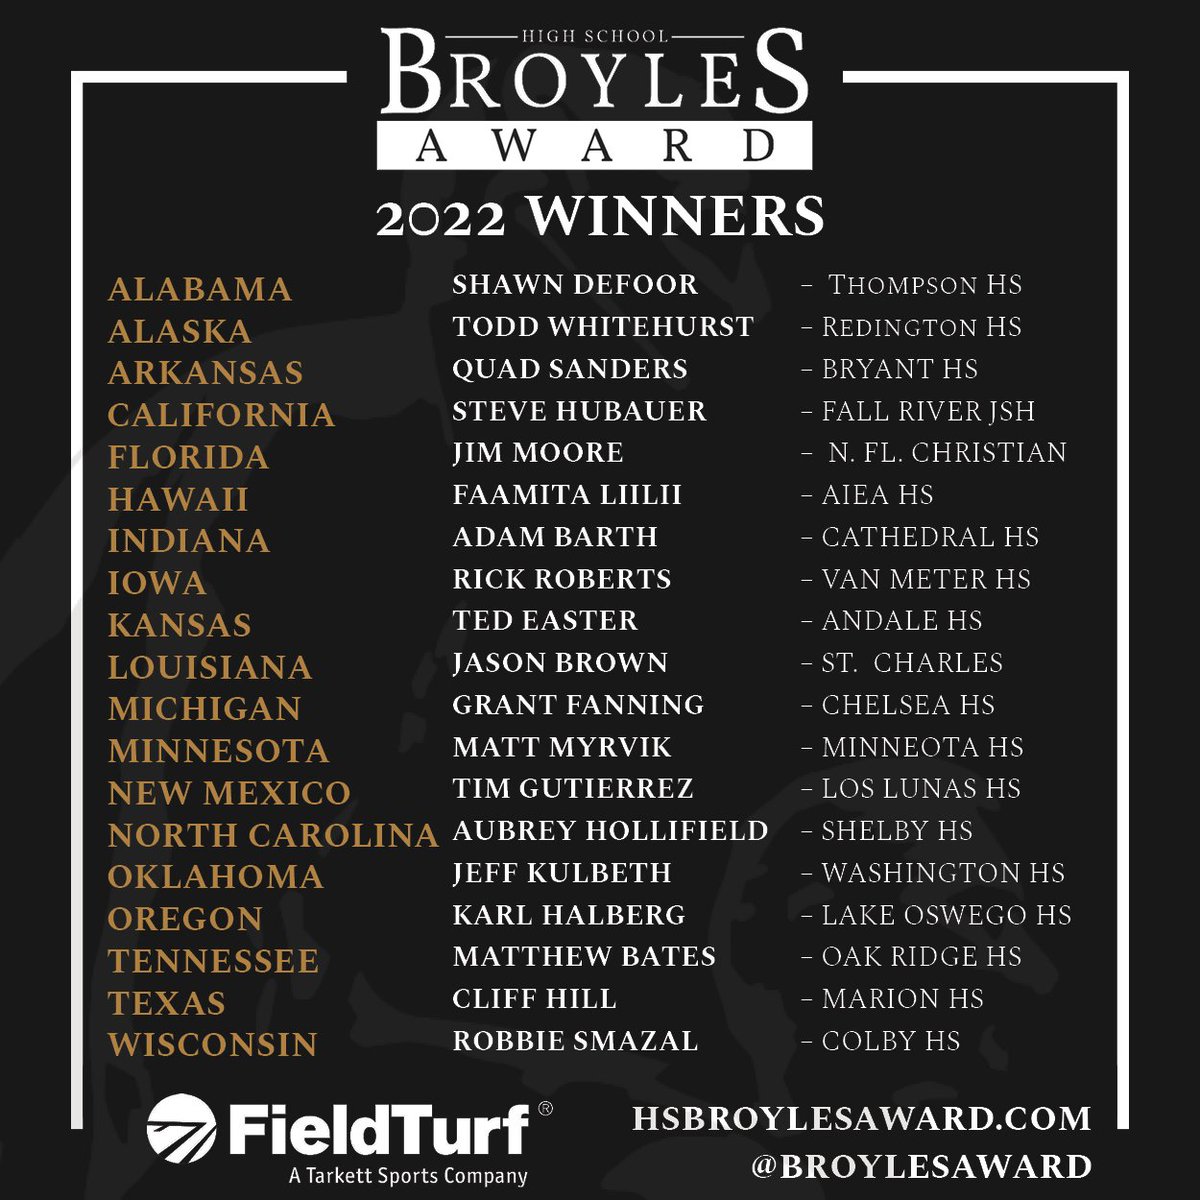 🏆Big news! This year's list of High School Broyles Award recipients is here! Our 2022 class is bigger than ever, with 19 winners from Alaska to North Carolina. Thank you to @FieldTurf, all state selection committees, and a big congratulations to our 2022 winners!